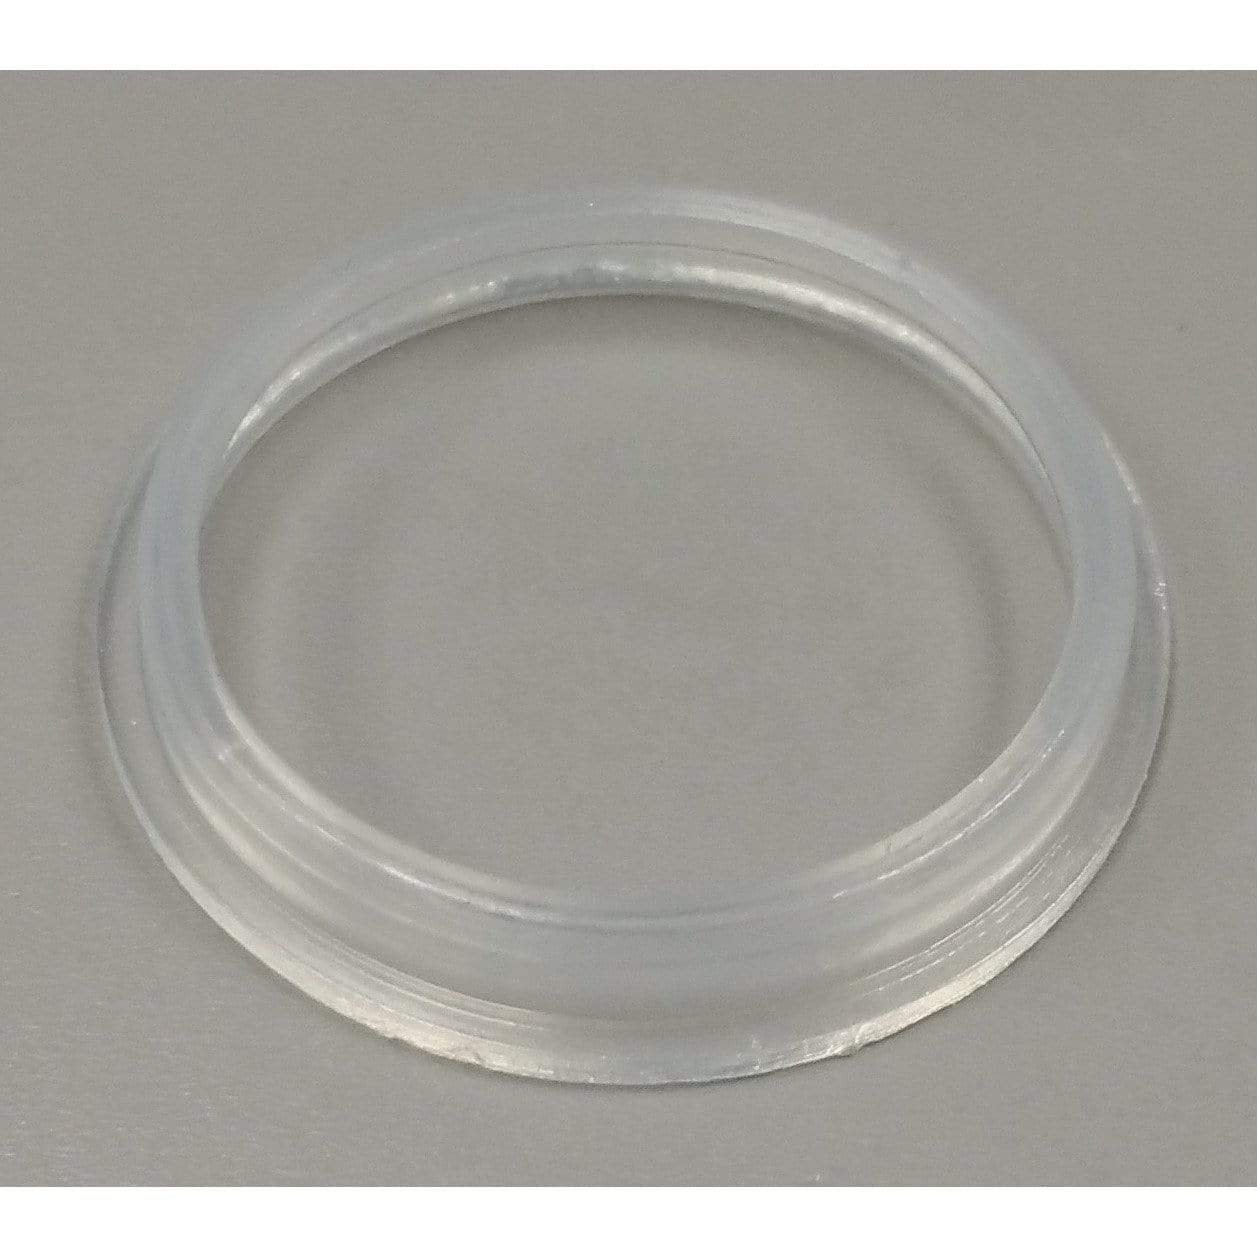 TFV4 Mini Replacement Seals BOTTOM Clear Seals/Oring's